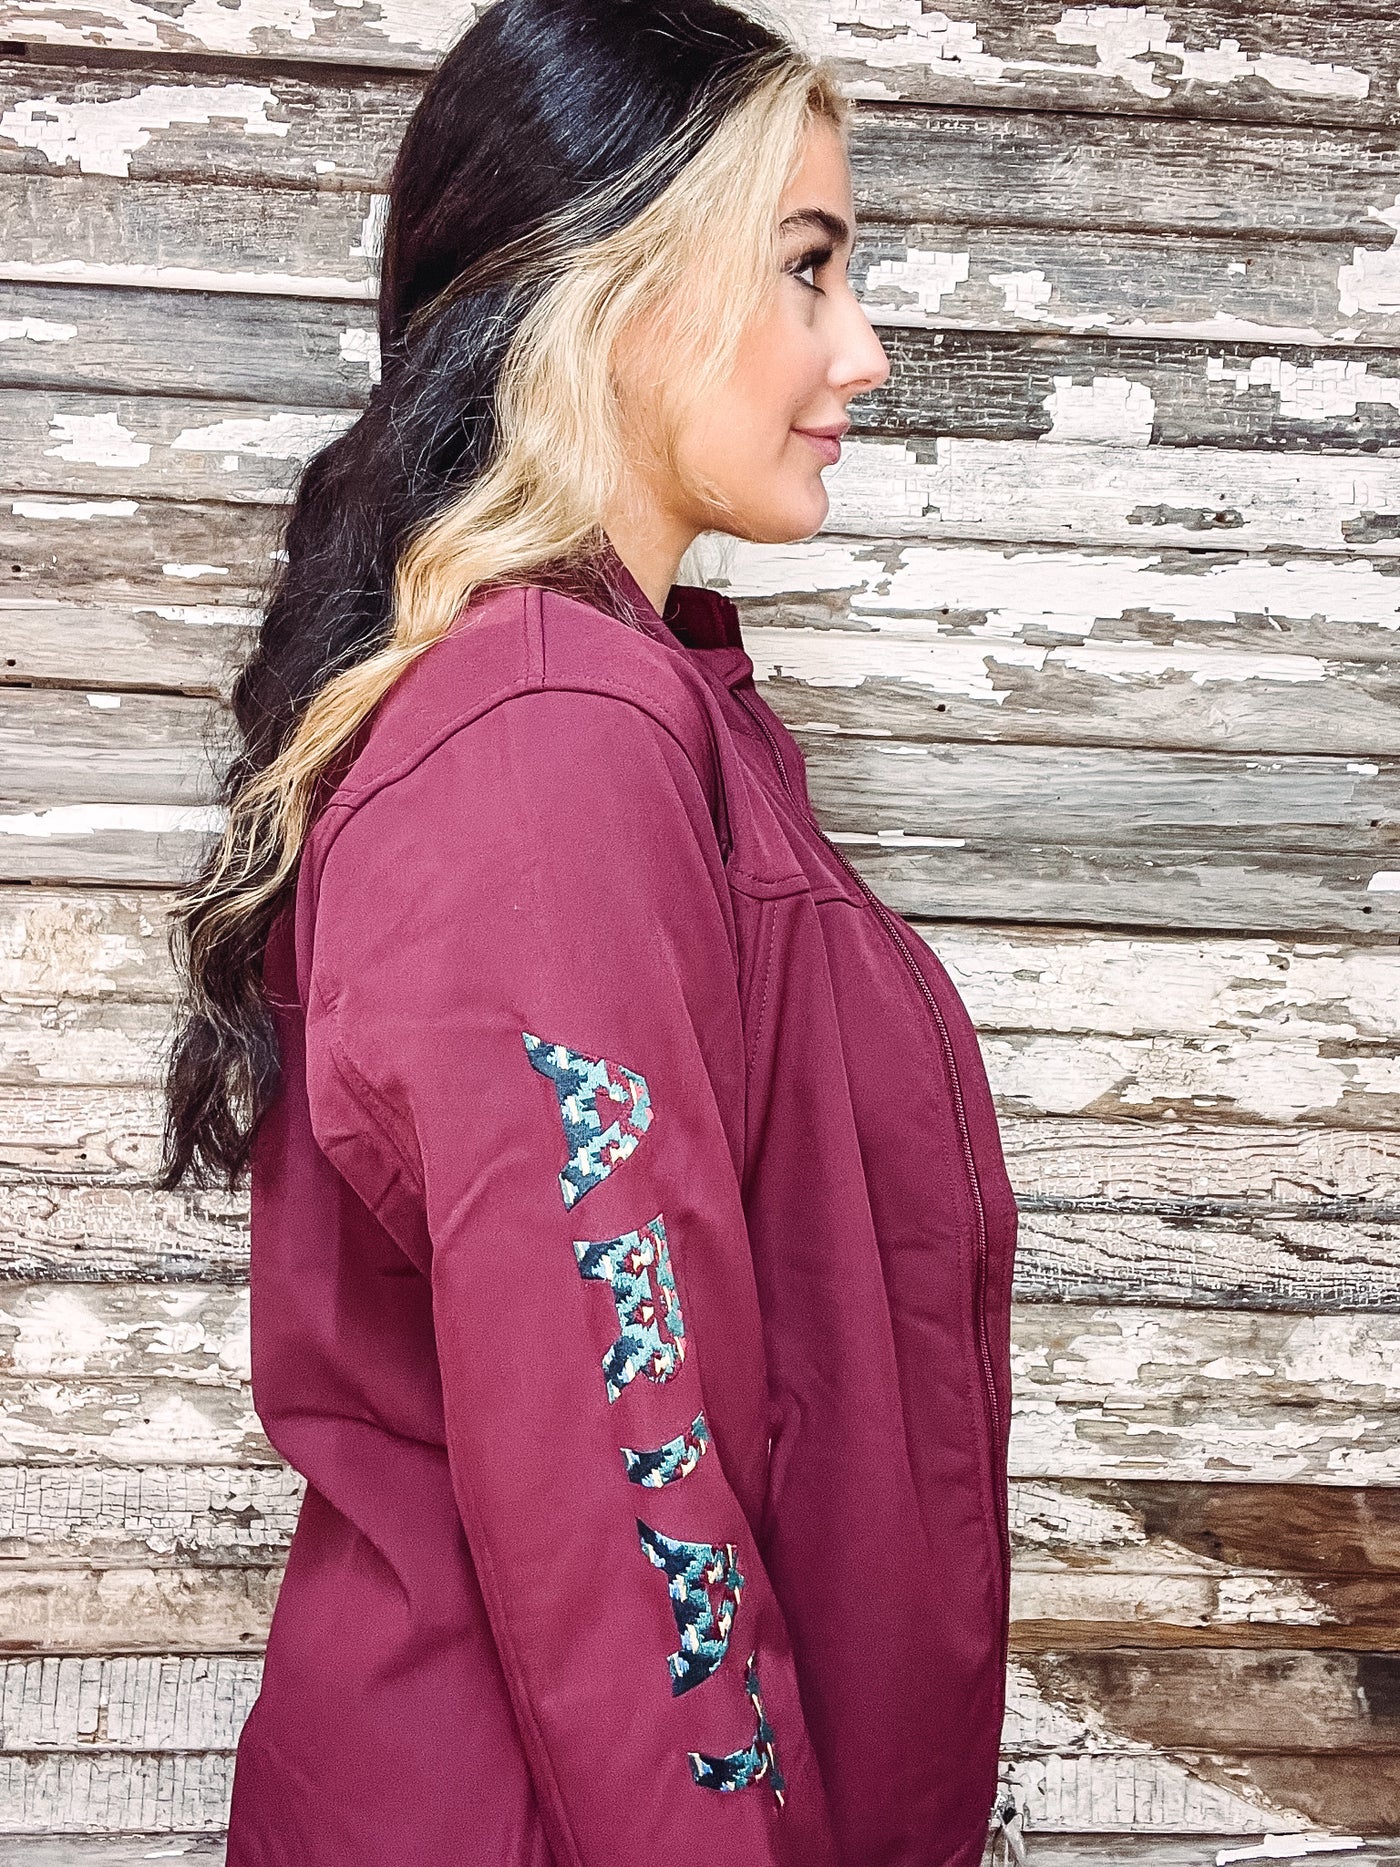 Team Softshell Jacket - Ariat-101 JACKETS-Ariat-Adelyn Elaine's Boutique, Women's Clothing Boutique in Gilmer, TX